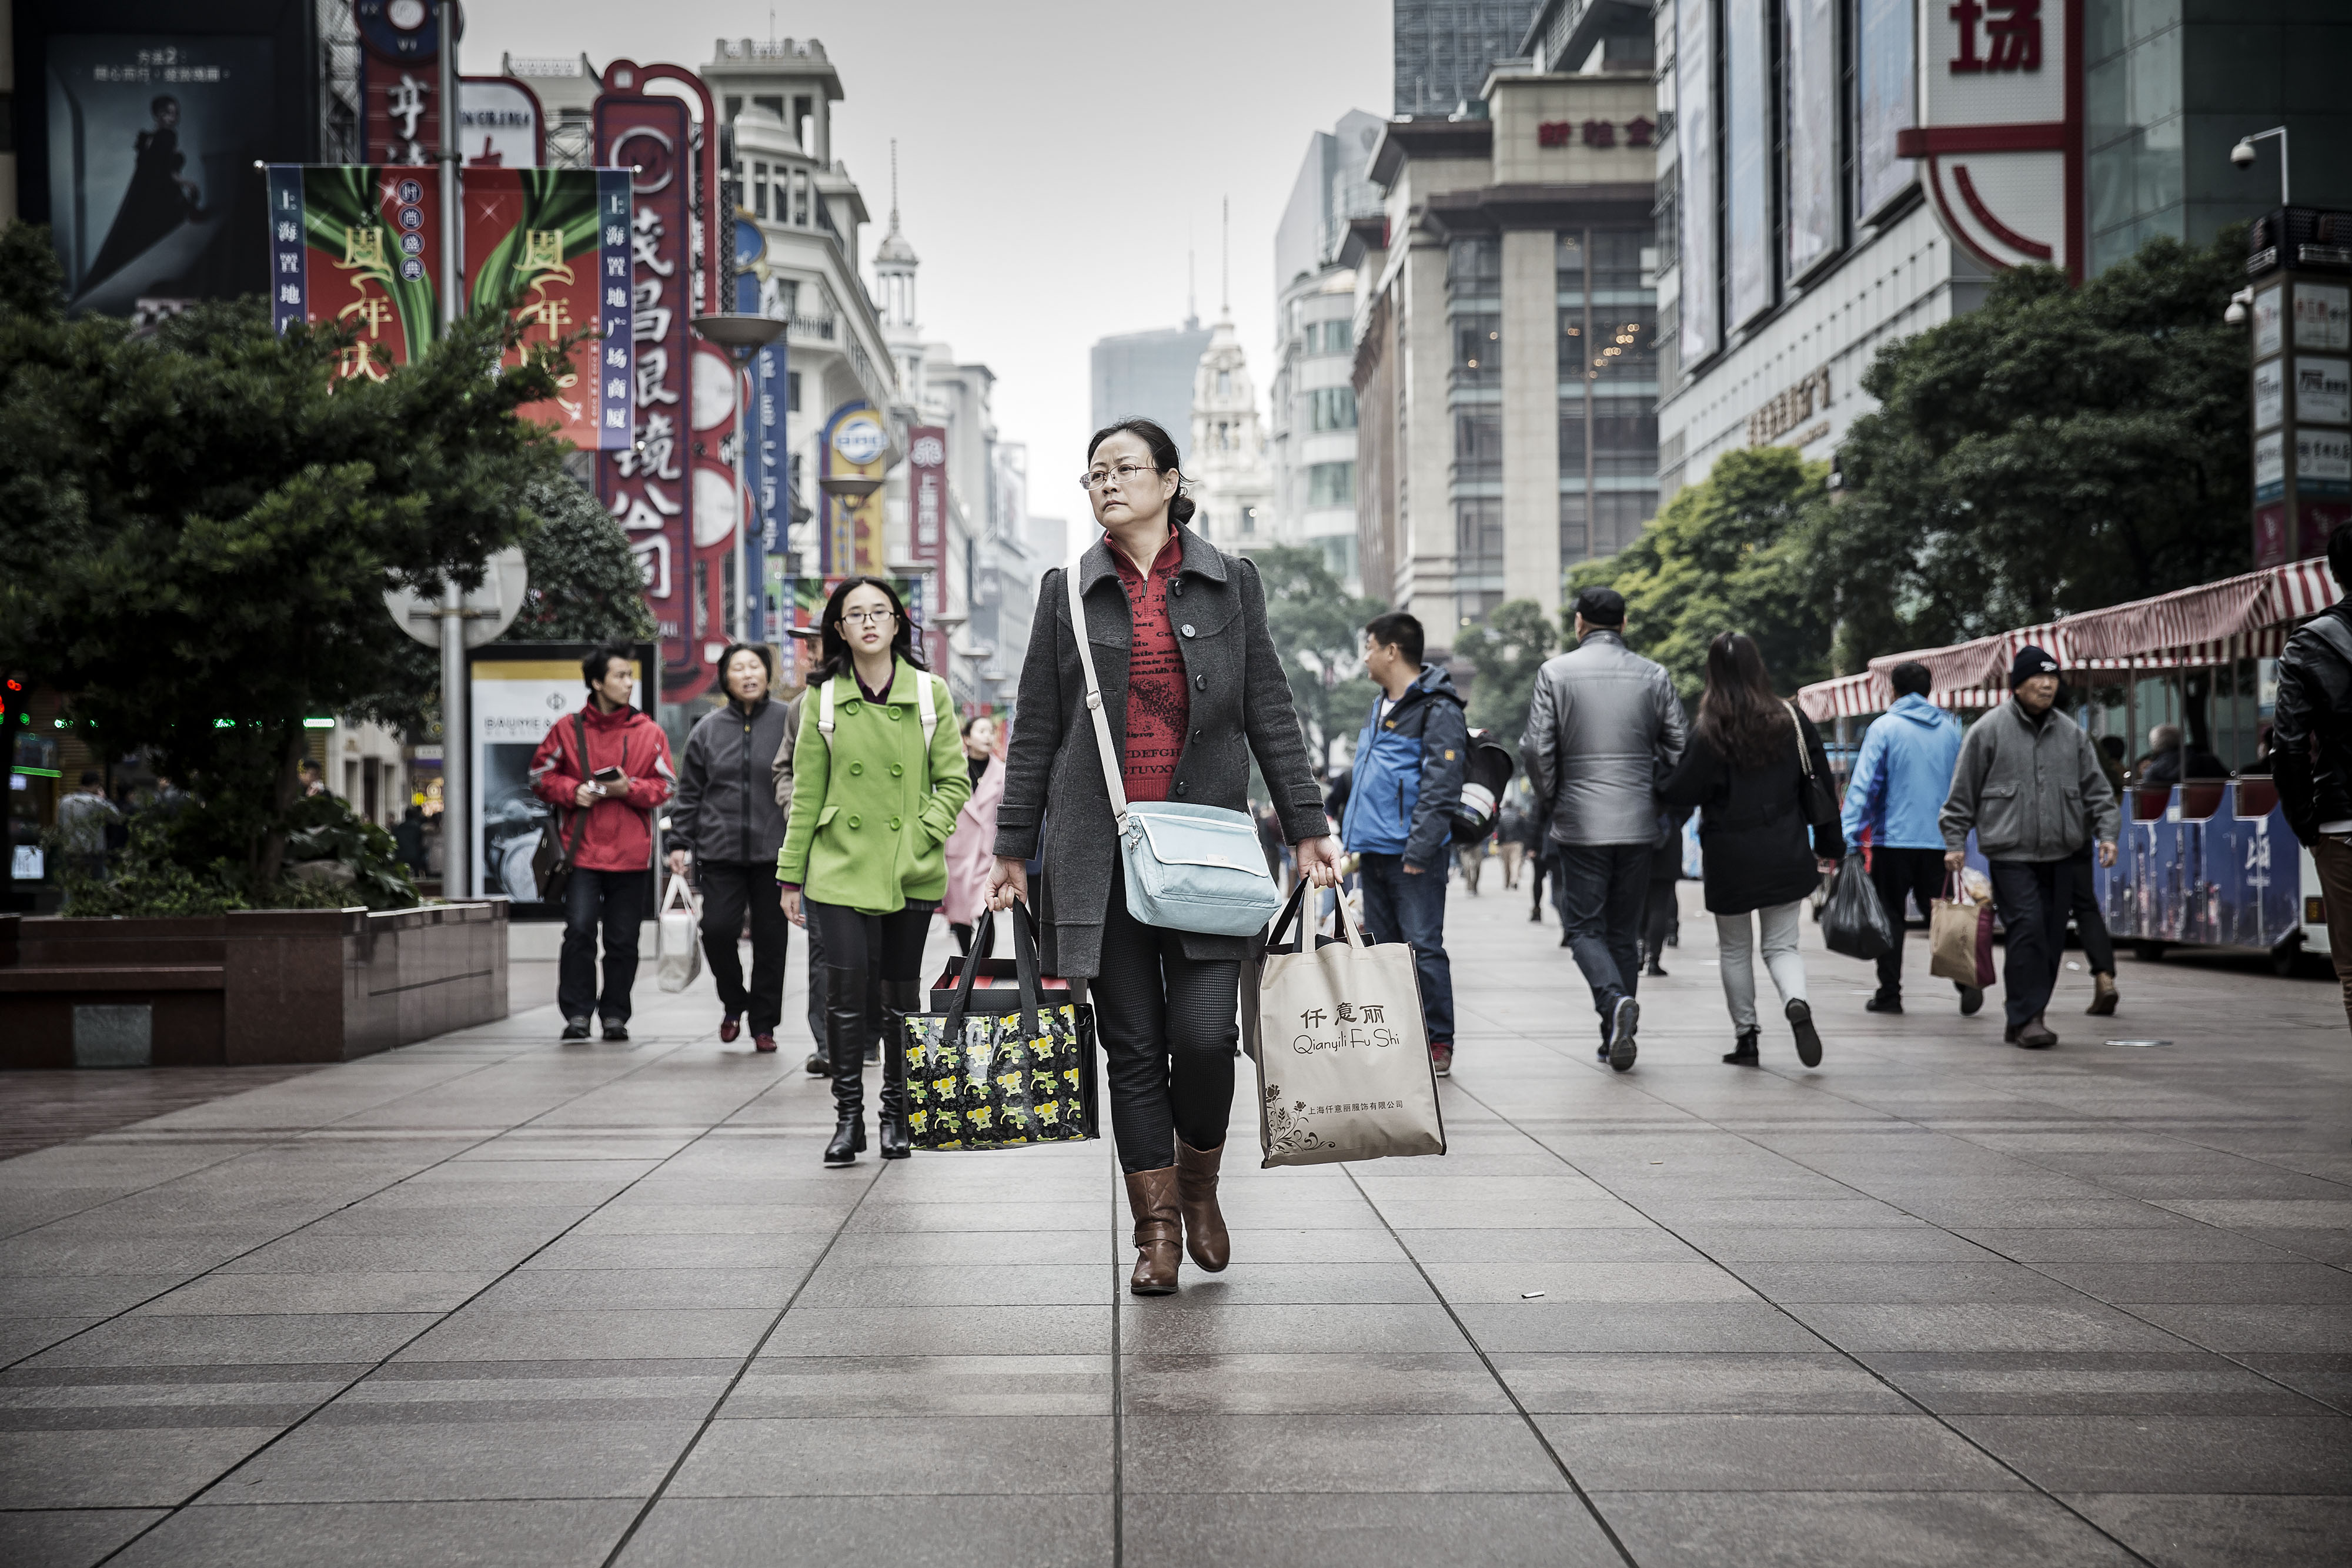 A woman carries shopping bags down Nanjing Road in Shanghai, China, on Saturday, Dec. 5, 2015. Premier Li Keqiang is facing a precarious balancing act as he eases fiscal policy to meet a target of 6.5 percent annual economic growth for the next five years, while reining in a debt pile that is estimated to be already more than twice the size of the world's second-largest economy. Photographer: Qilai Shen/Bloomberg ORG XMIT: 595439177